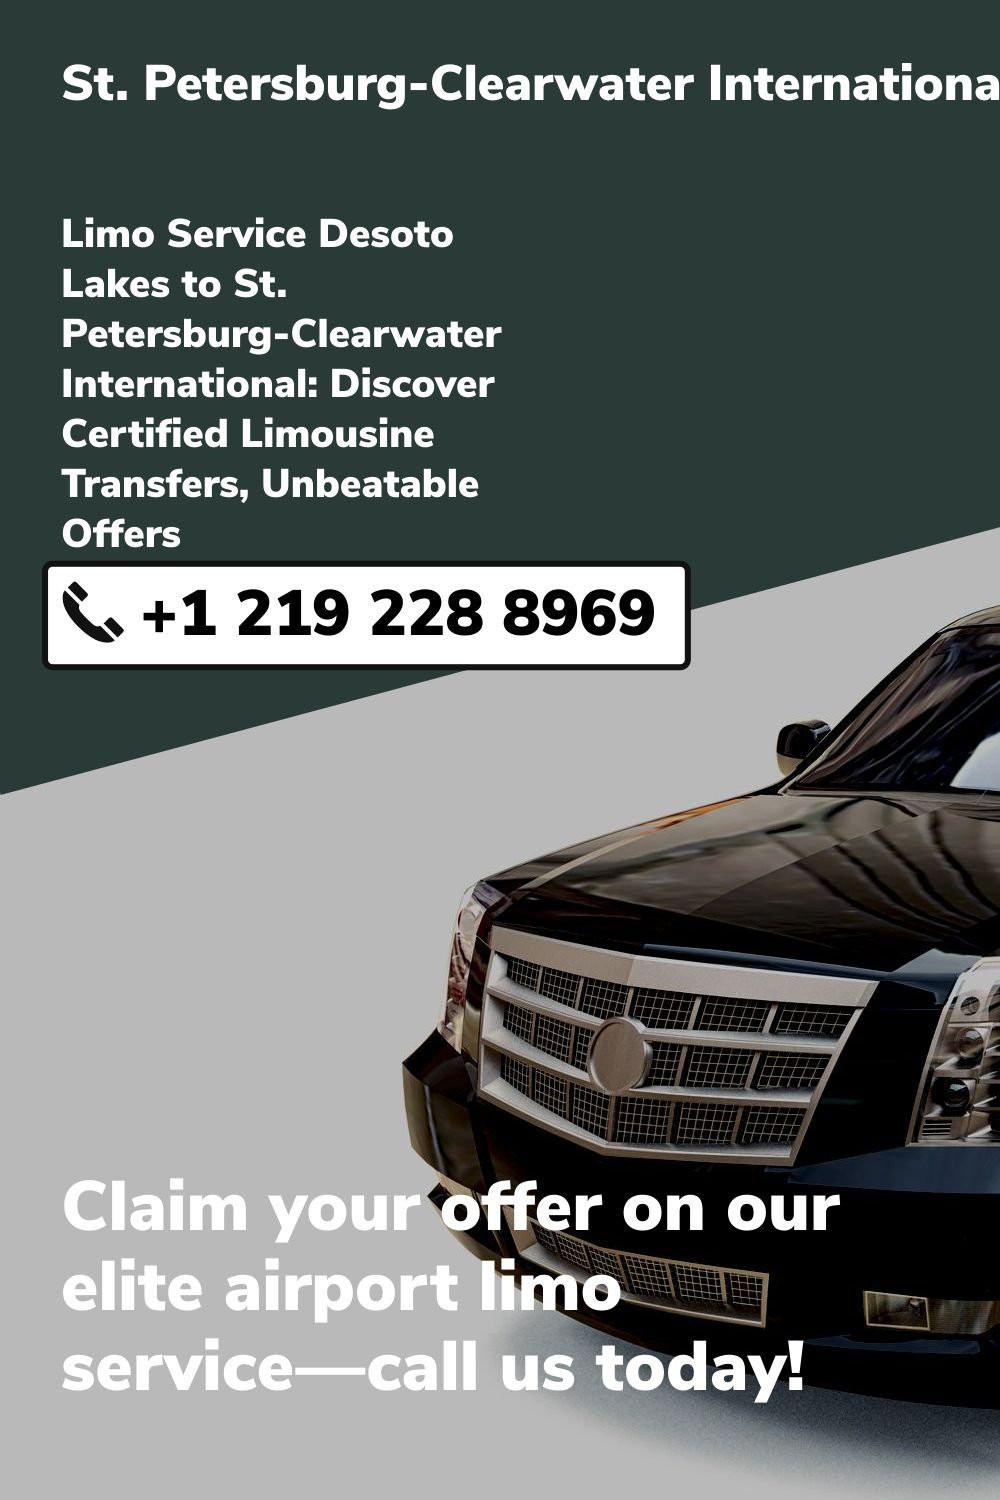 St. Petersburg-Clearwater International Airport Limo